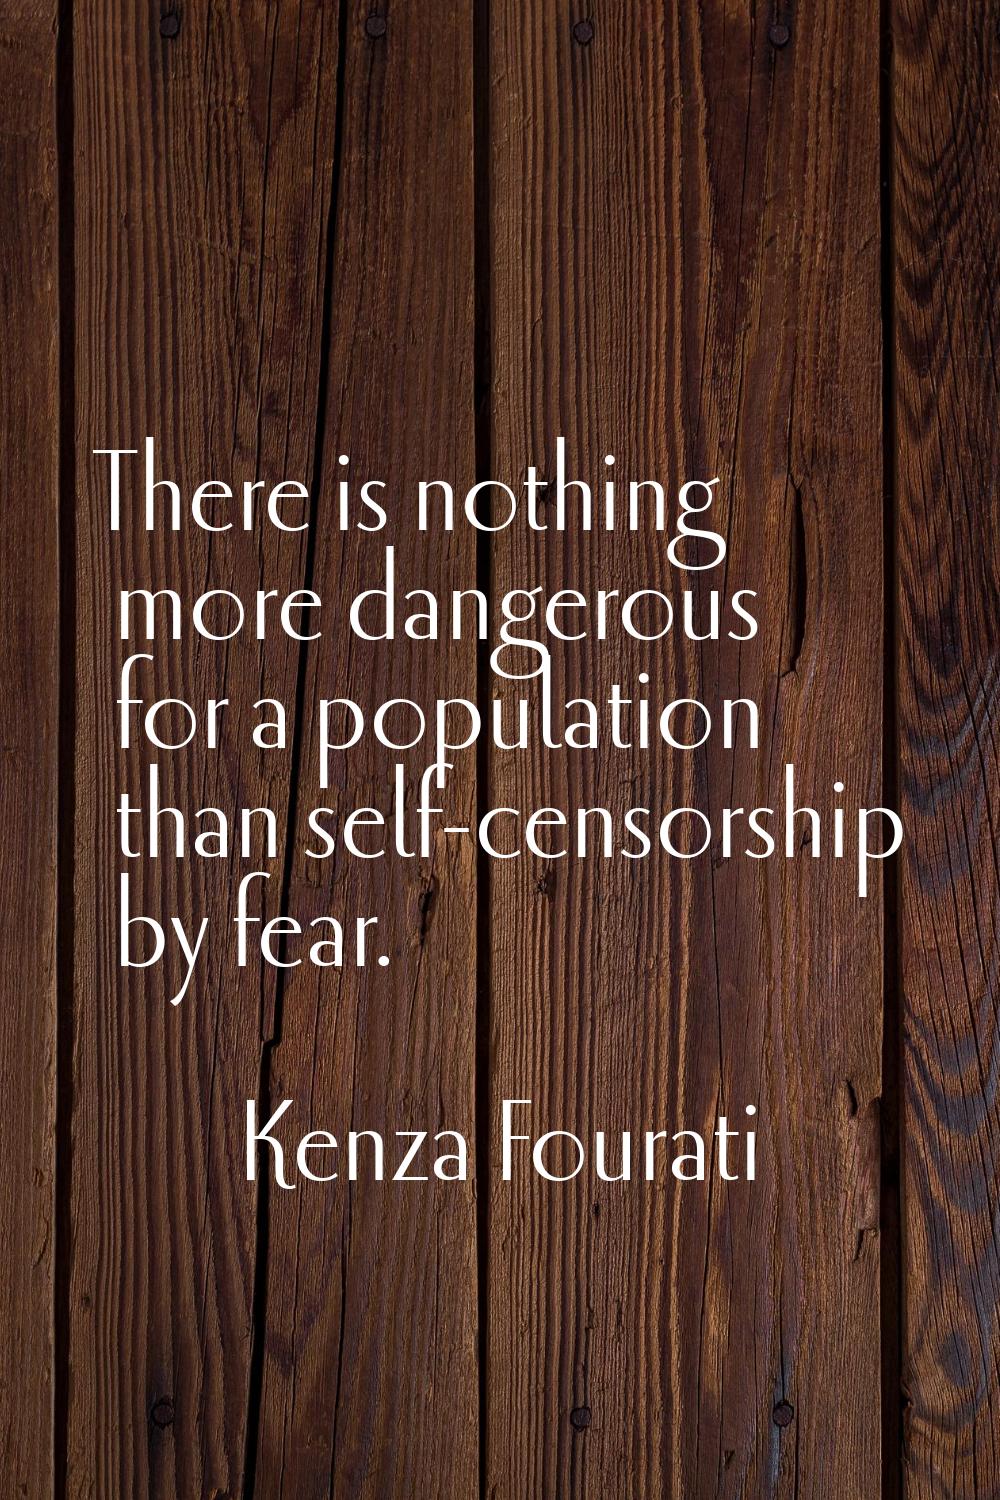 There is nothing more dangerous for a population than self-censorship by fear.